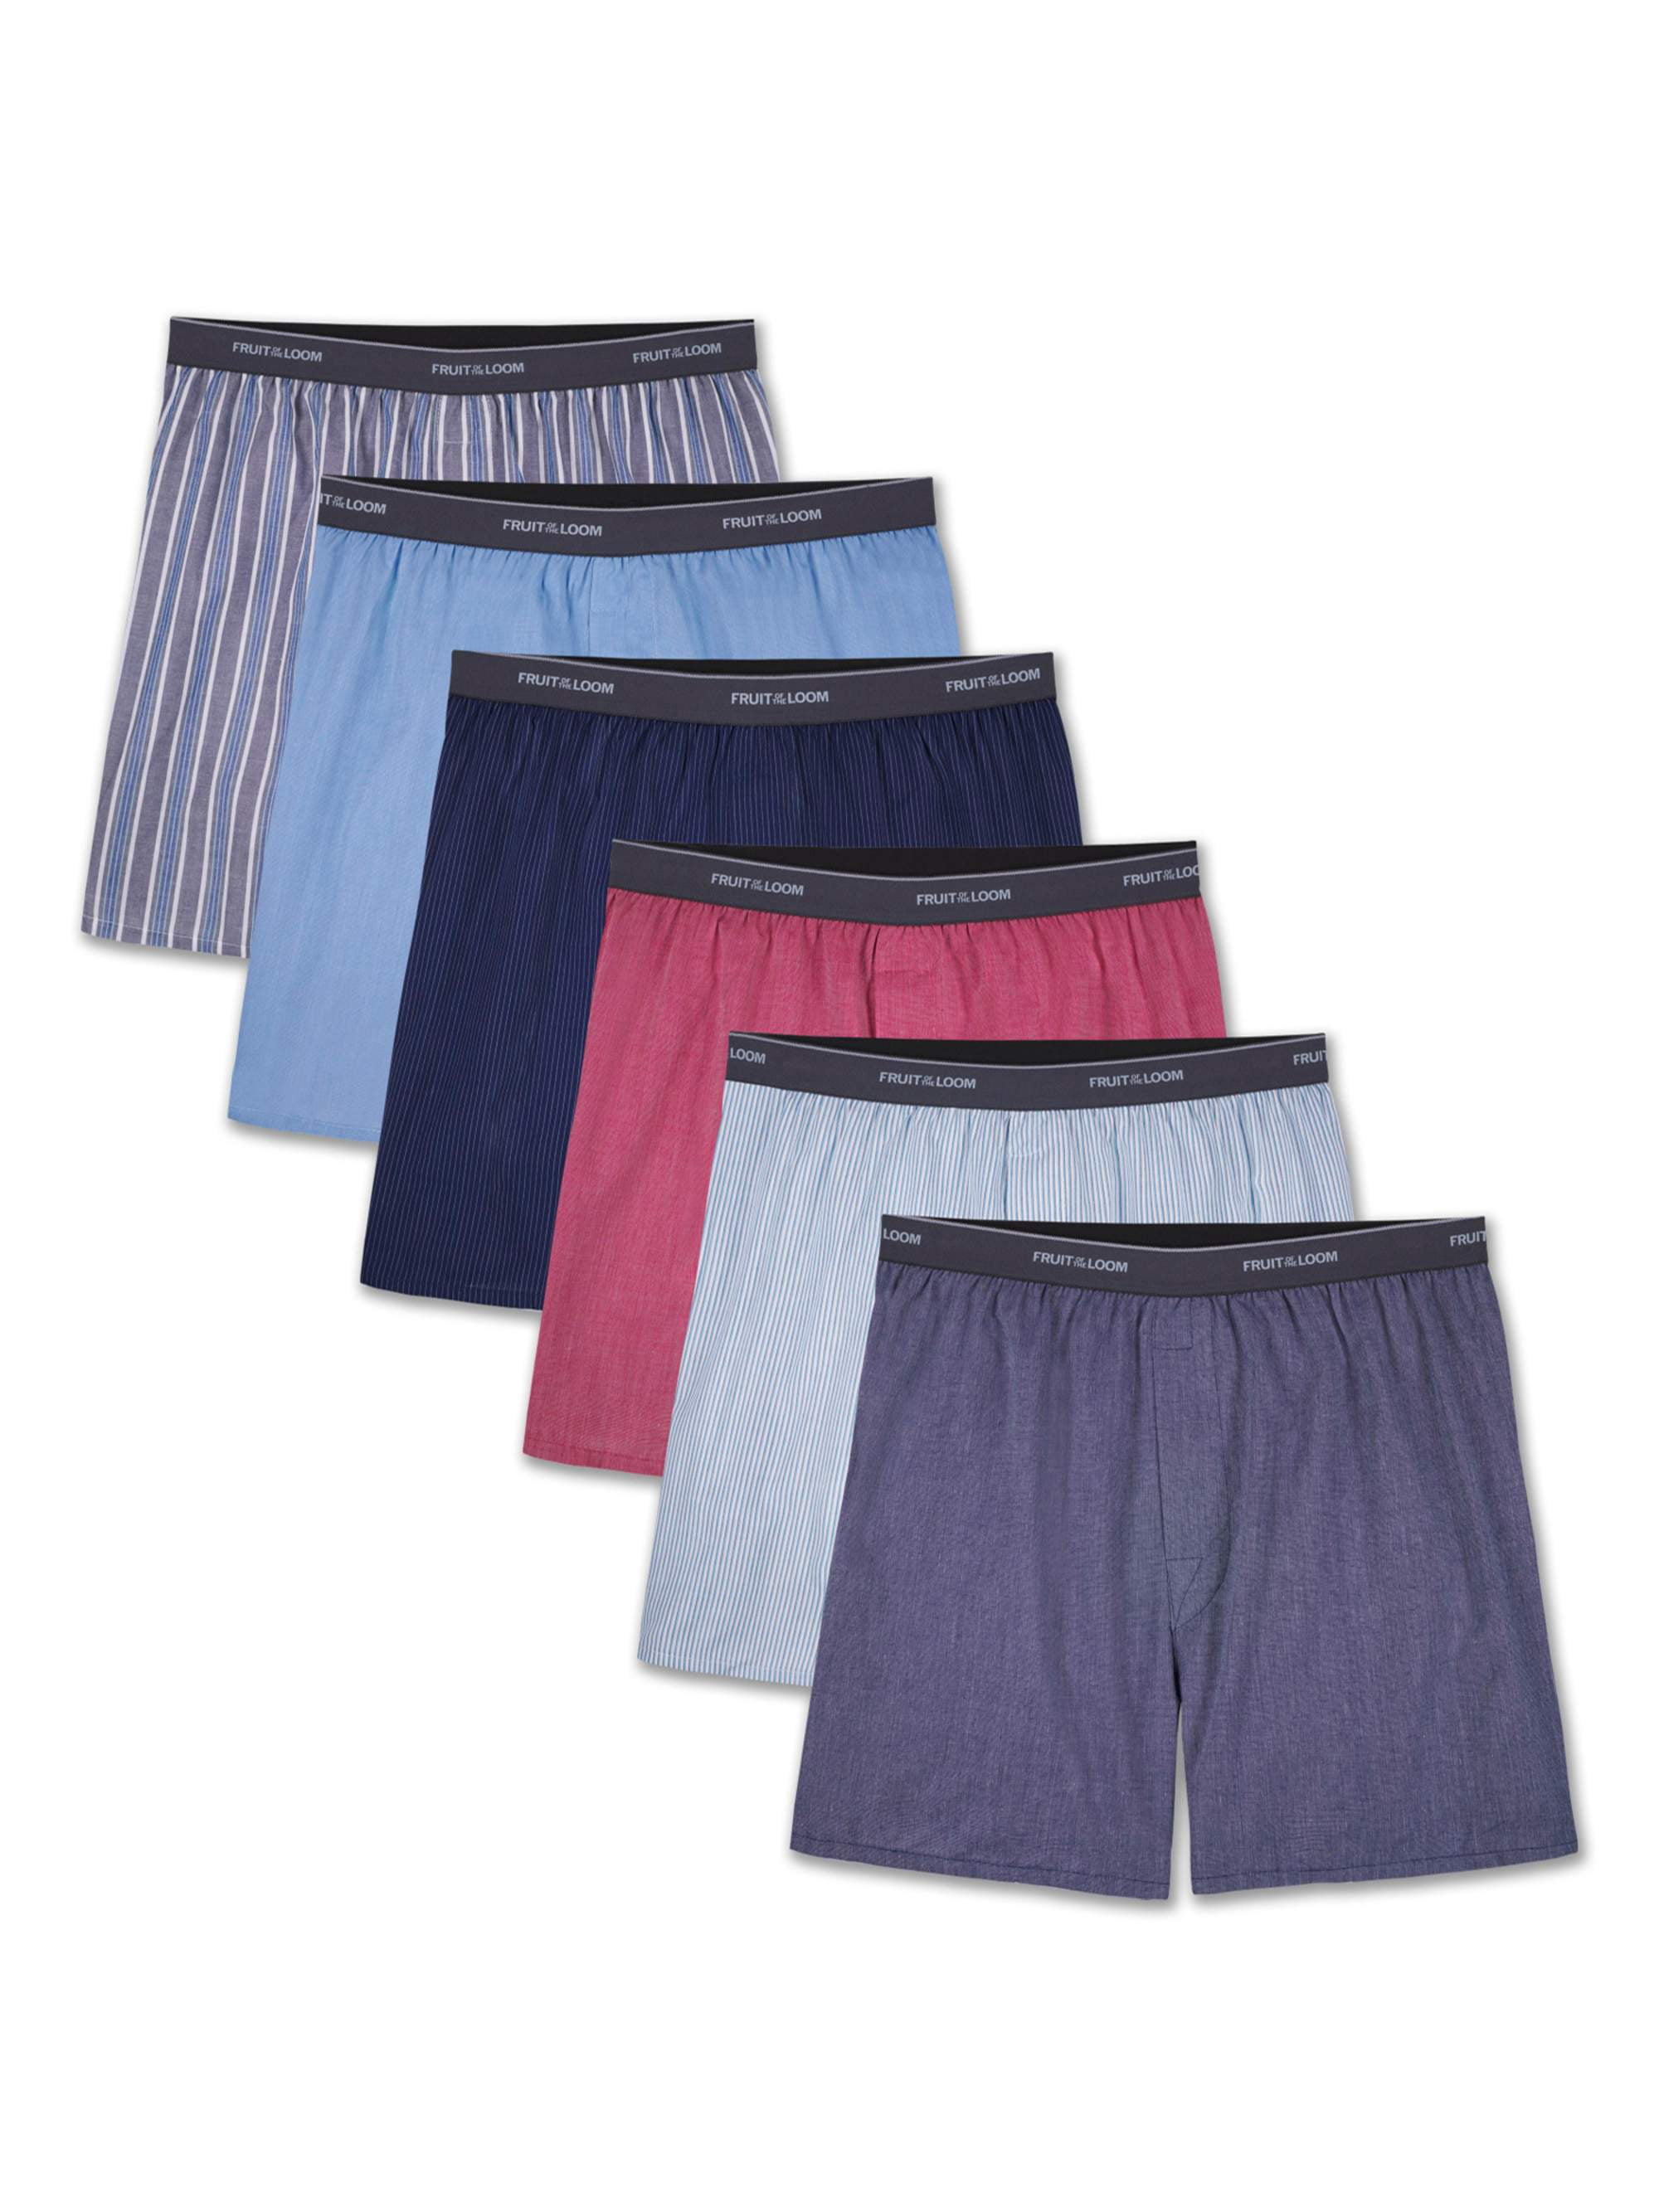 Fruit of the Loom MensKnit Boxer with Exposed Waistband Assorted Pack of 3